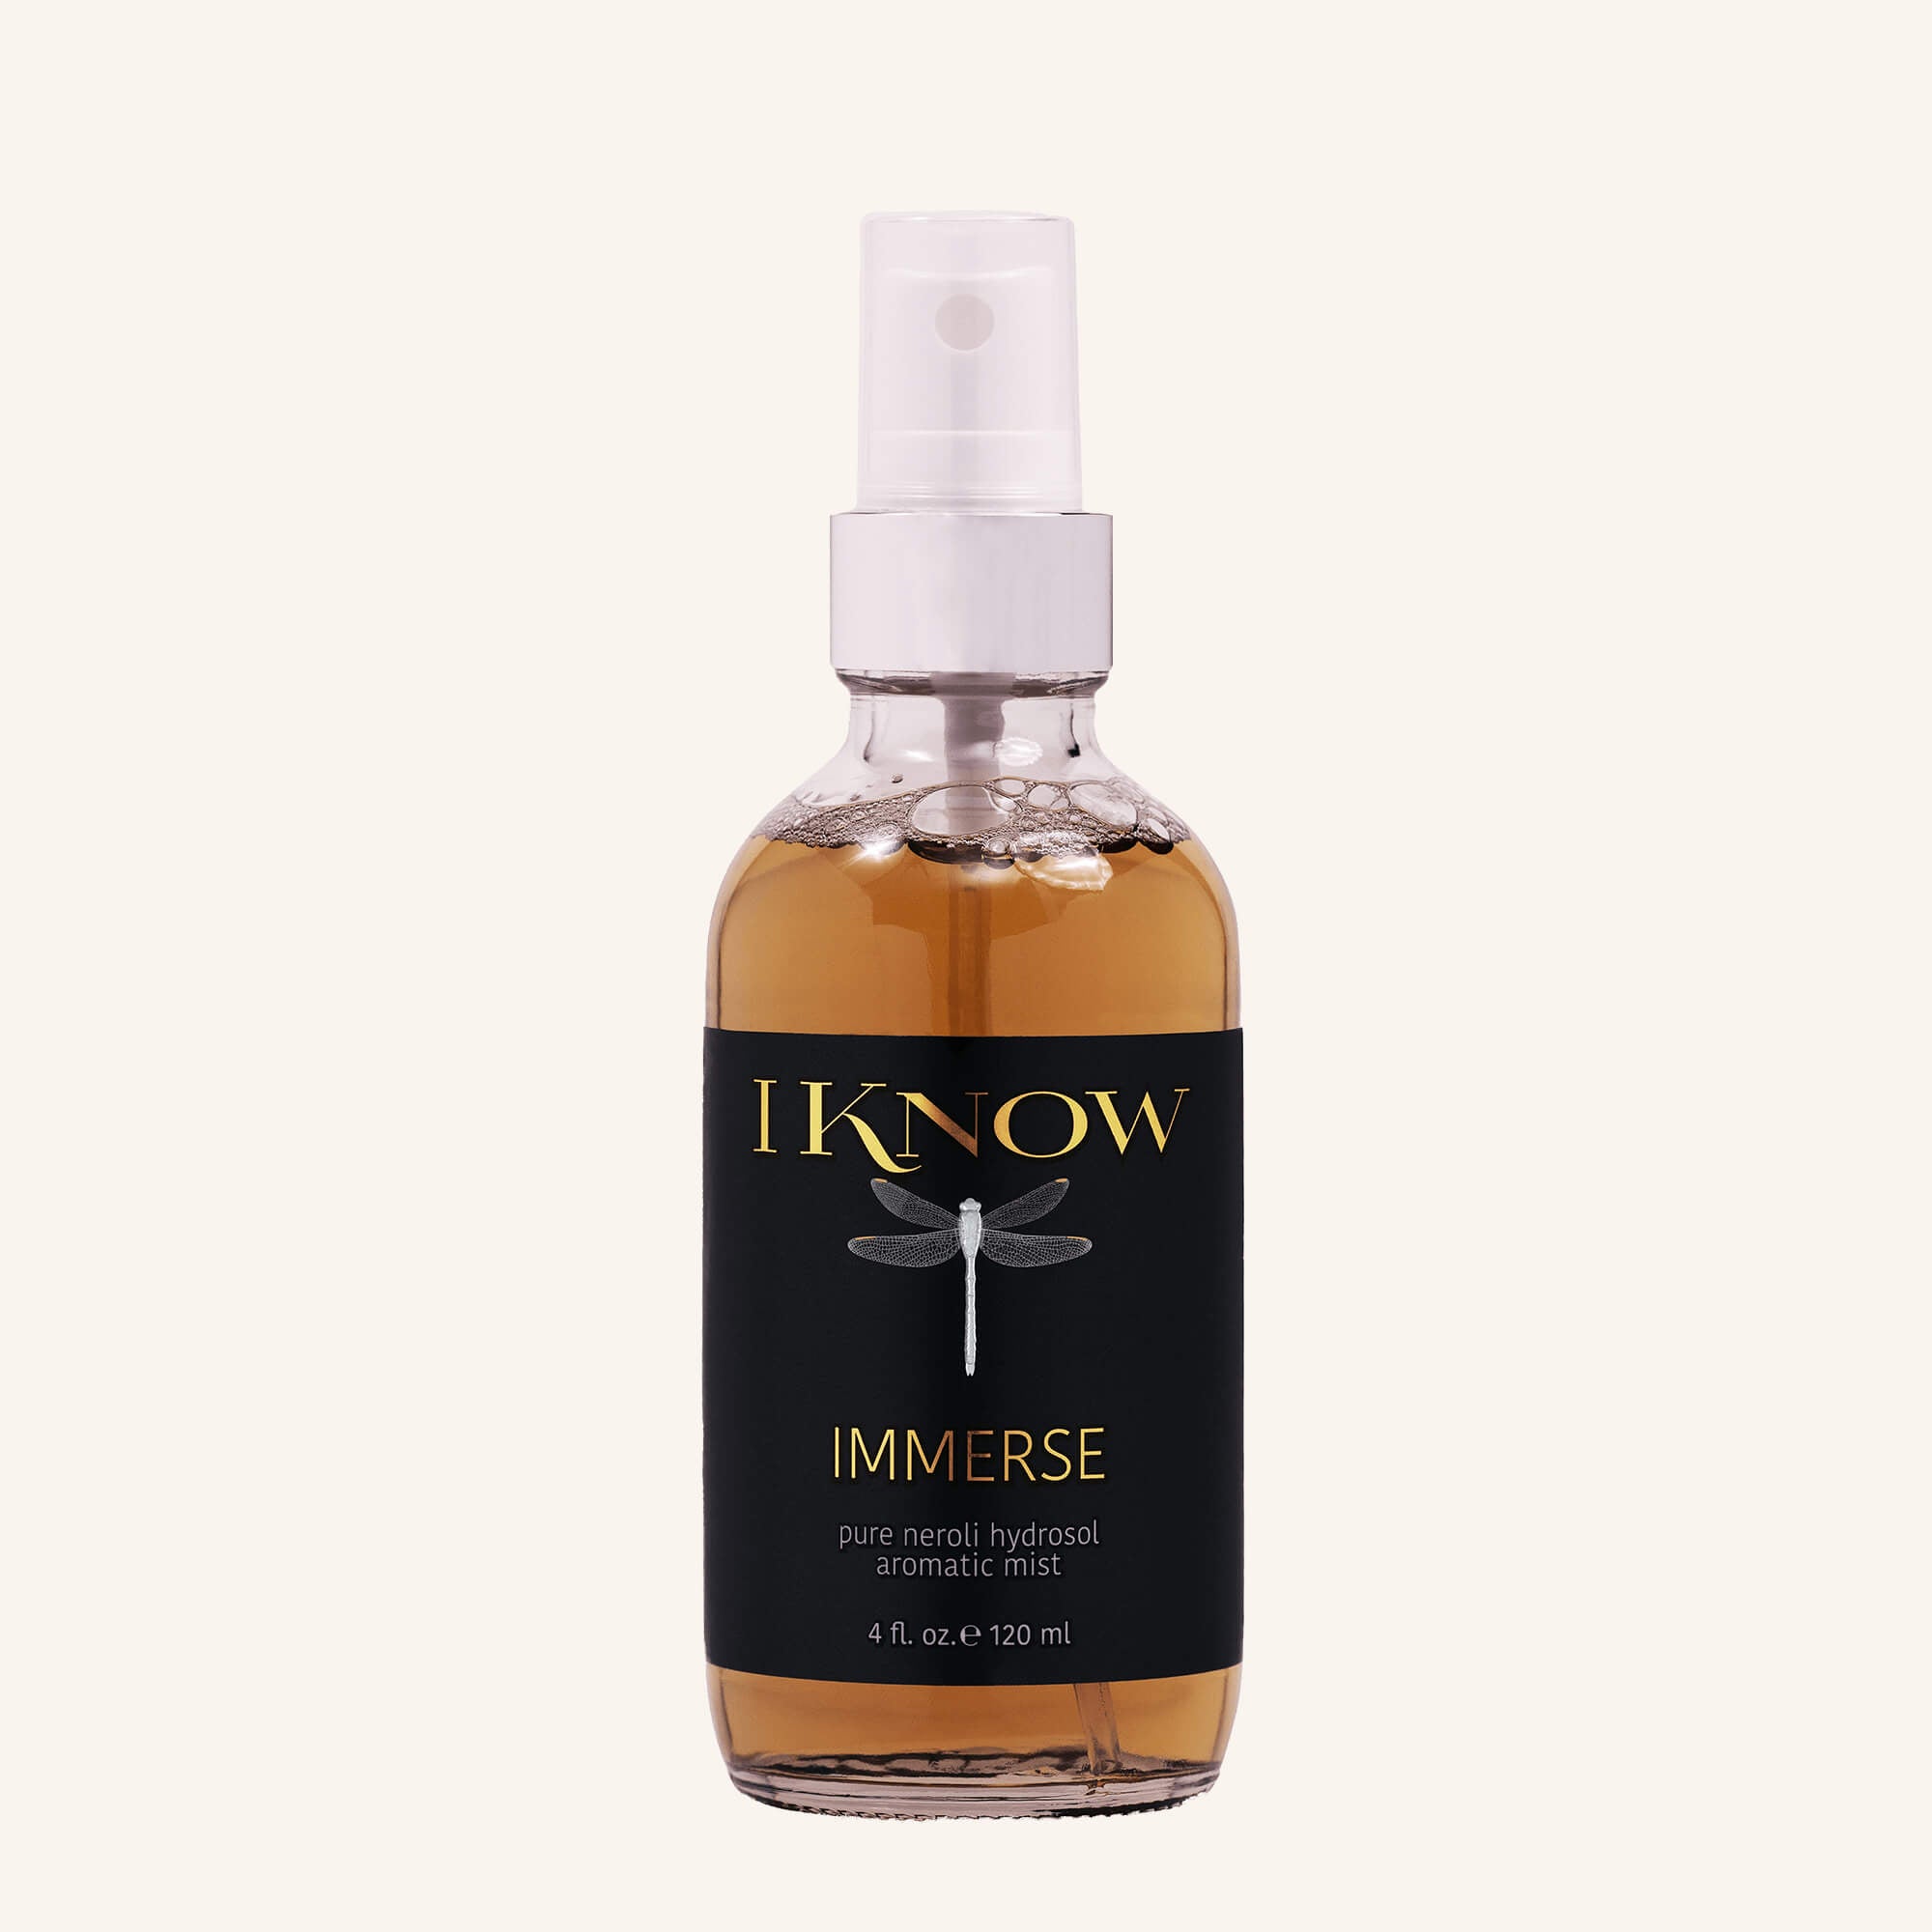 IKNOW Immerse Pure Neroli Oil Mist helps tone, balance and calm skin class=